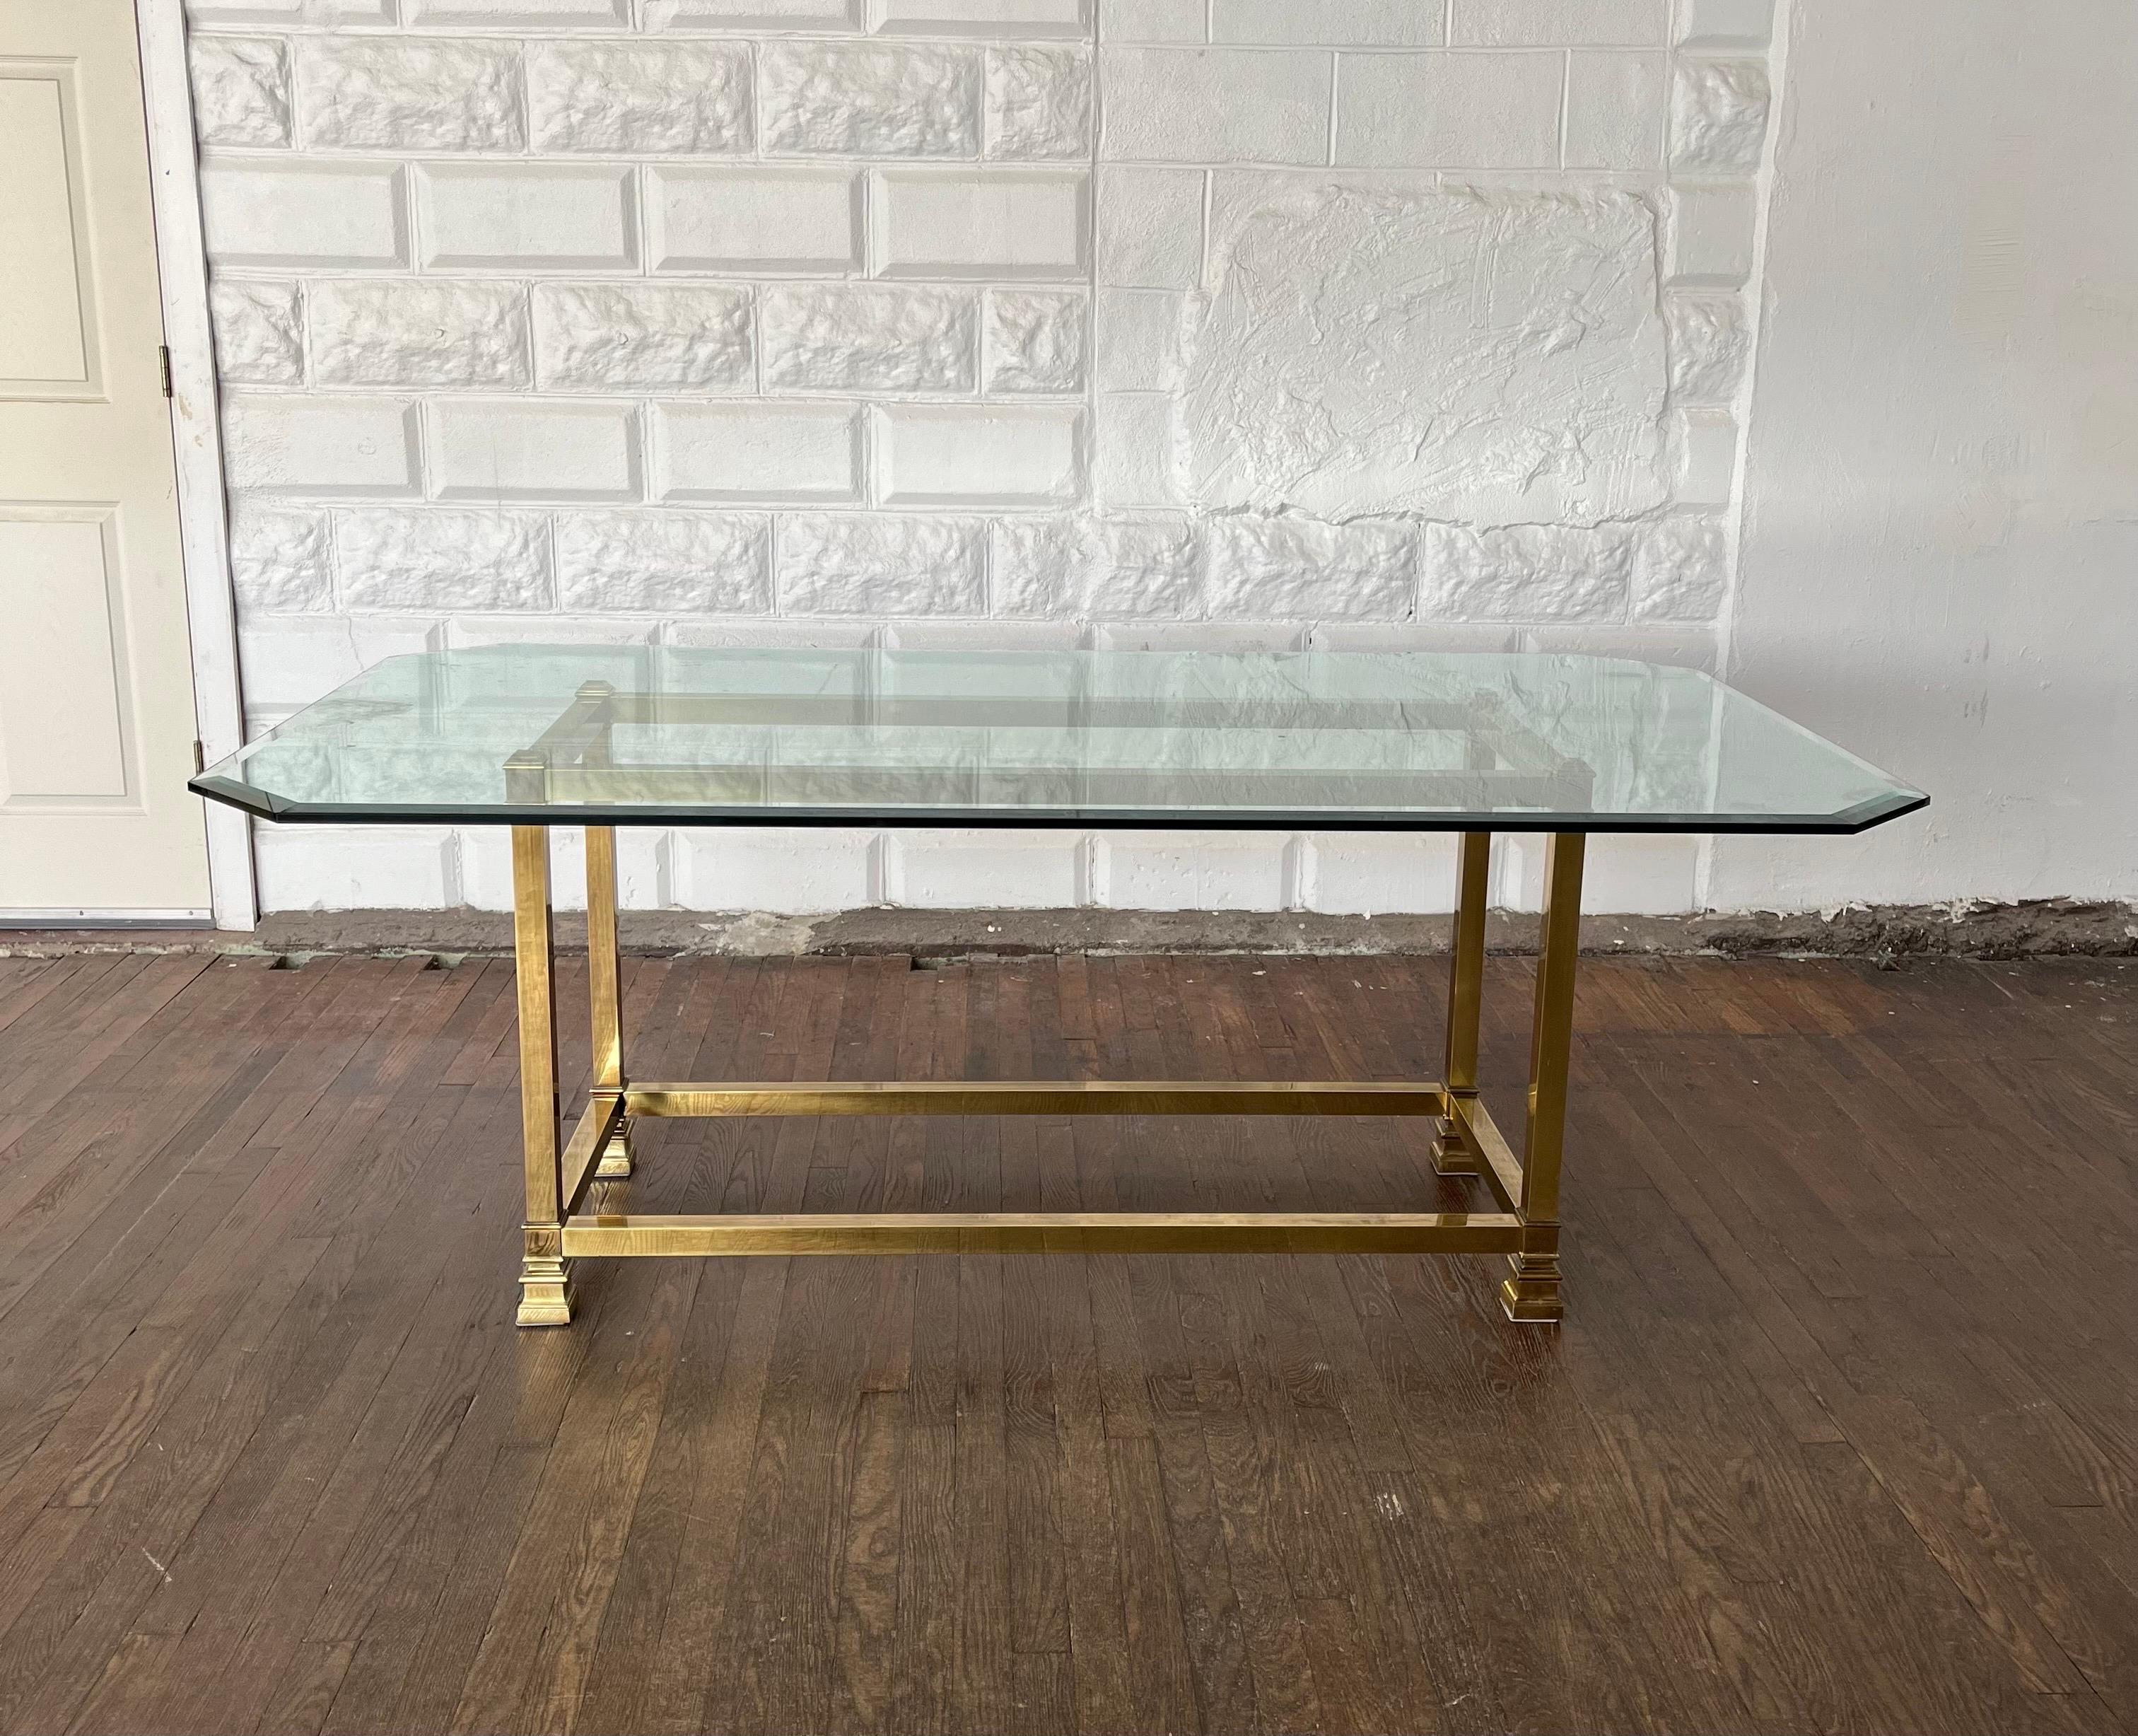 Mastercraft brass dining table with thick beveled glass top. Classic and elegant modern Neoclassical design finished in antiqued brass. 
Curbside to NYC/Philly $400( will need muscle for heavy glass)